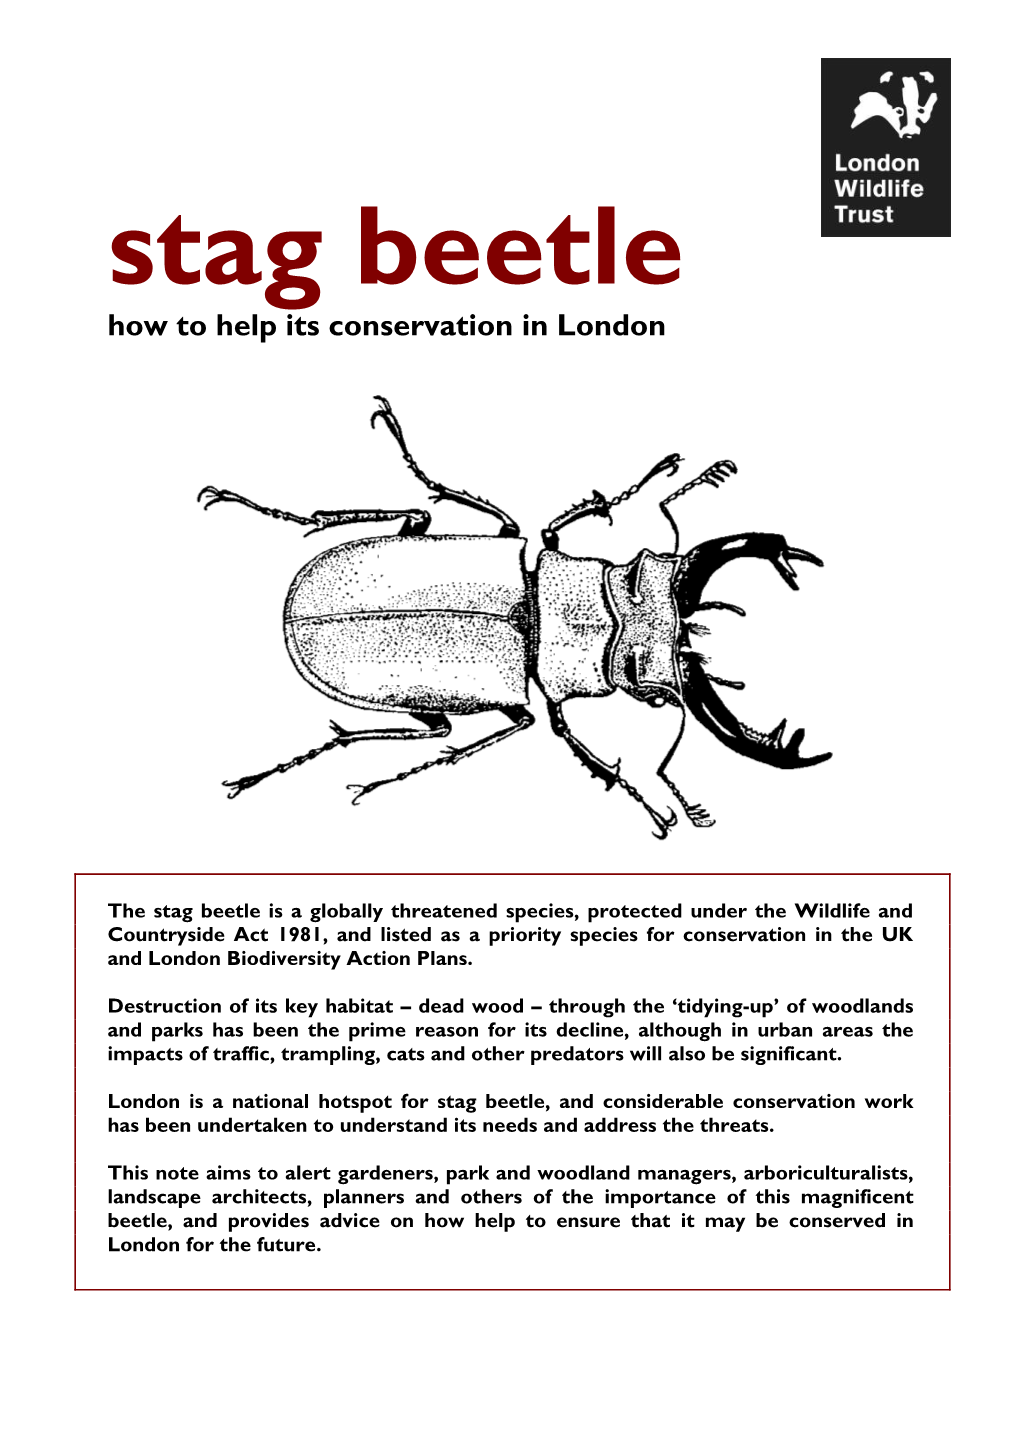 How to Help Stag Beetles